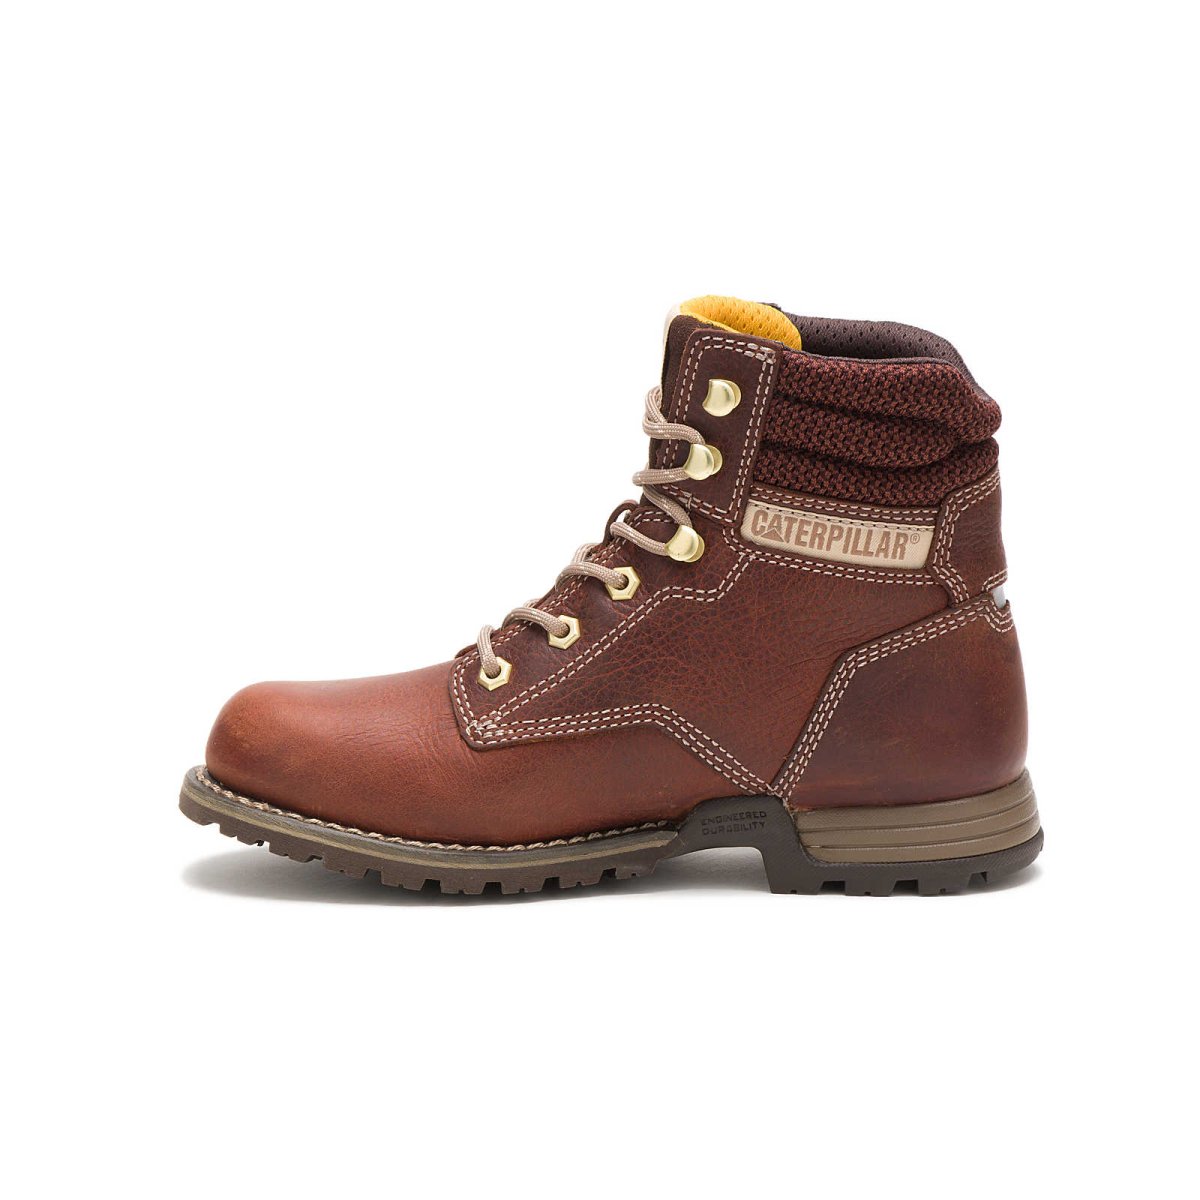 CATERPILLAR PAISLEY 6" WOME'S WORK BOOT (P51001) IN TAWNY - TLW Shoes